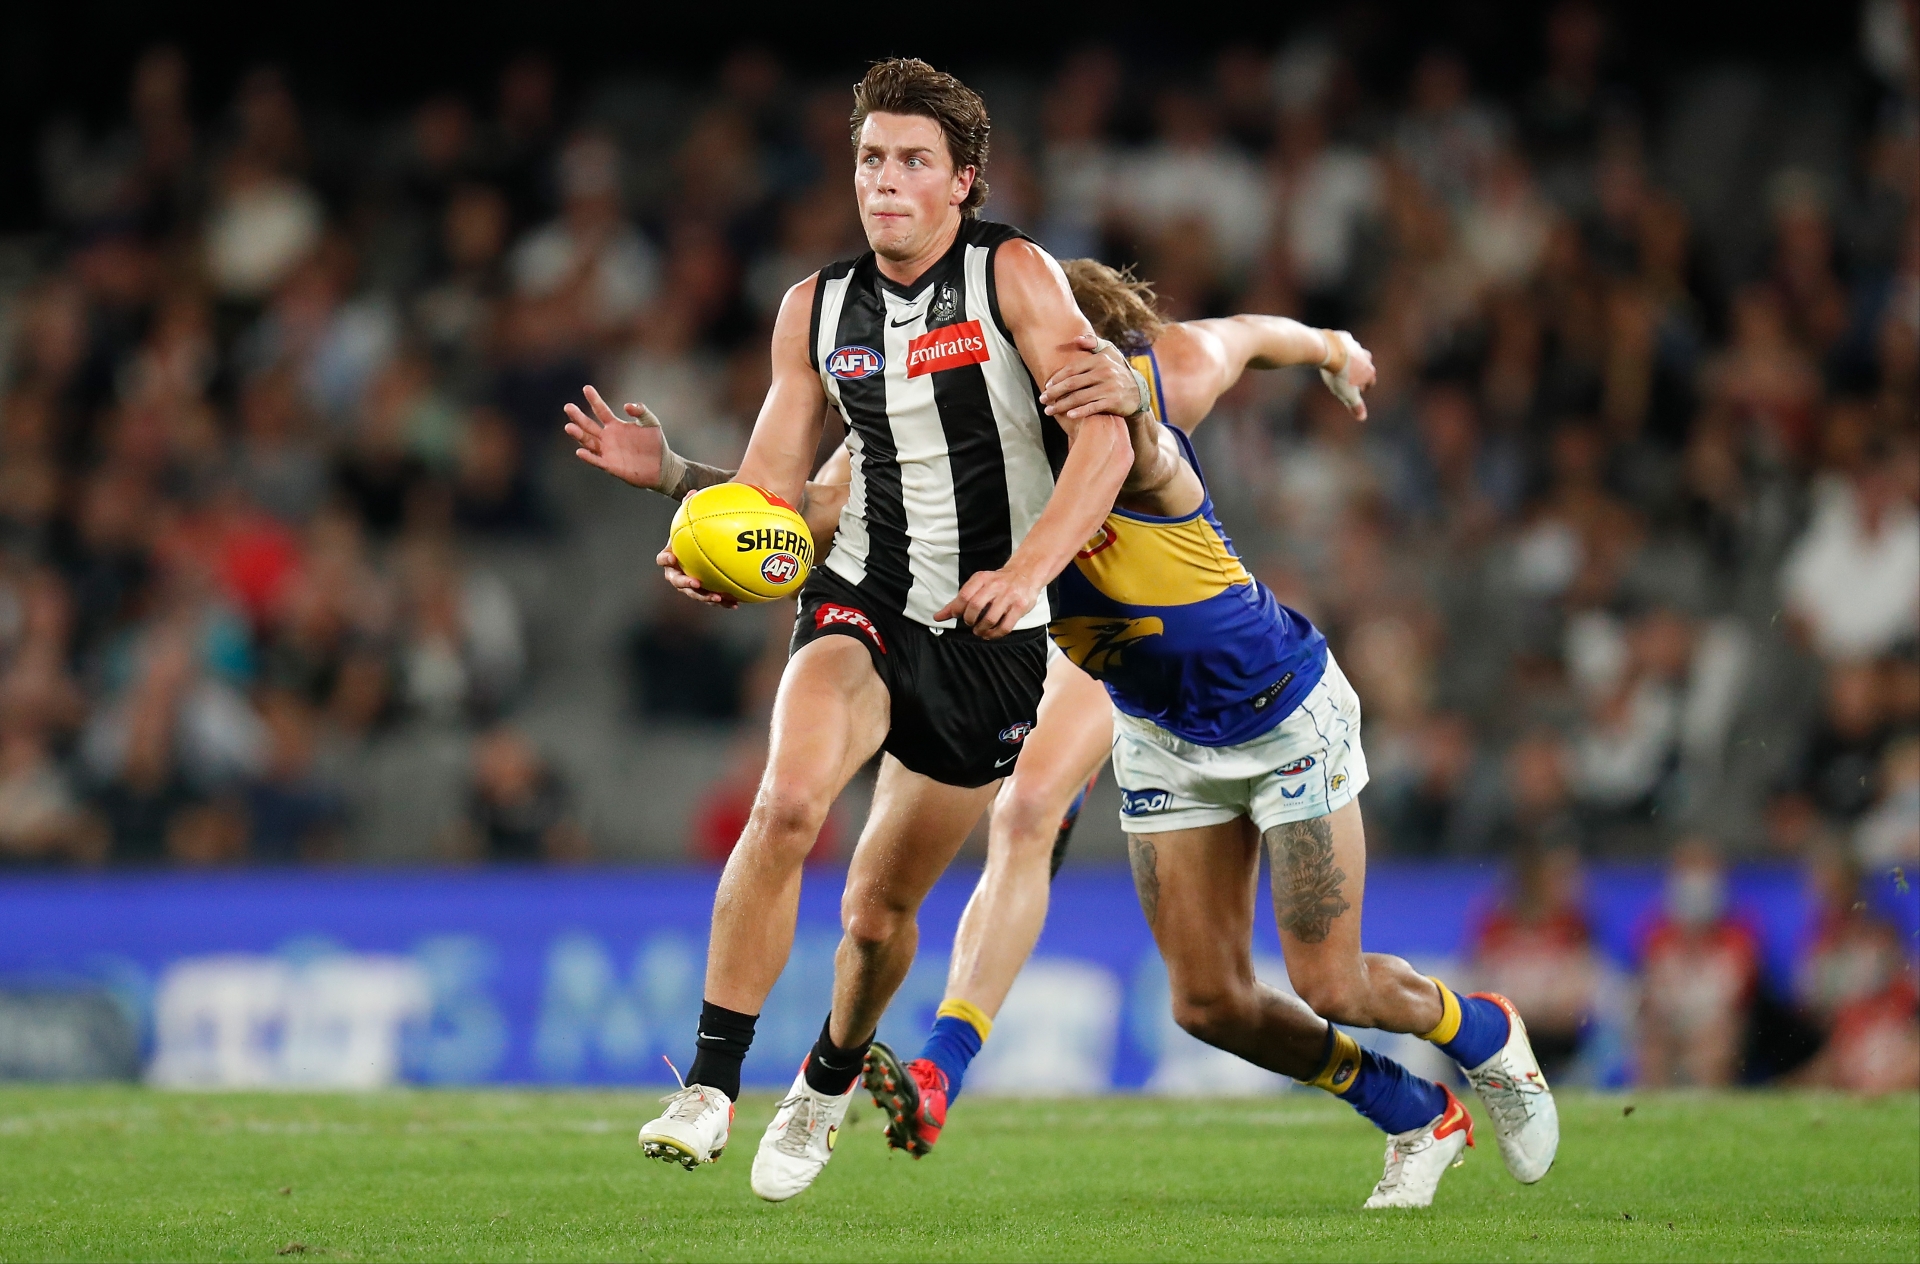 West Coast Eagles Vs Collingwood Tips Preview Can The Eagles Shock The Pies